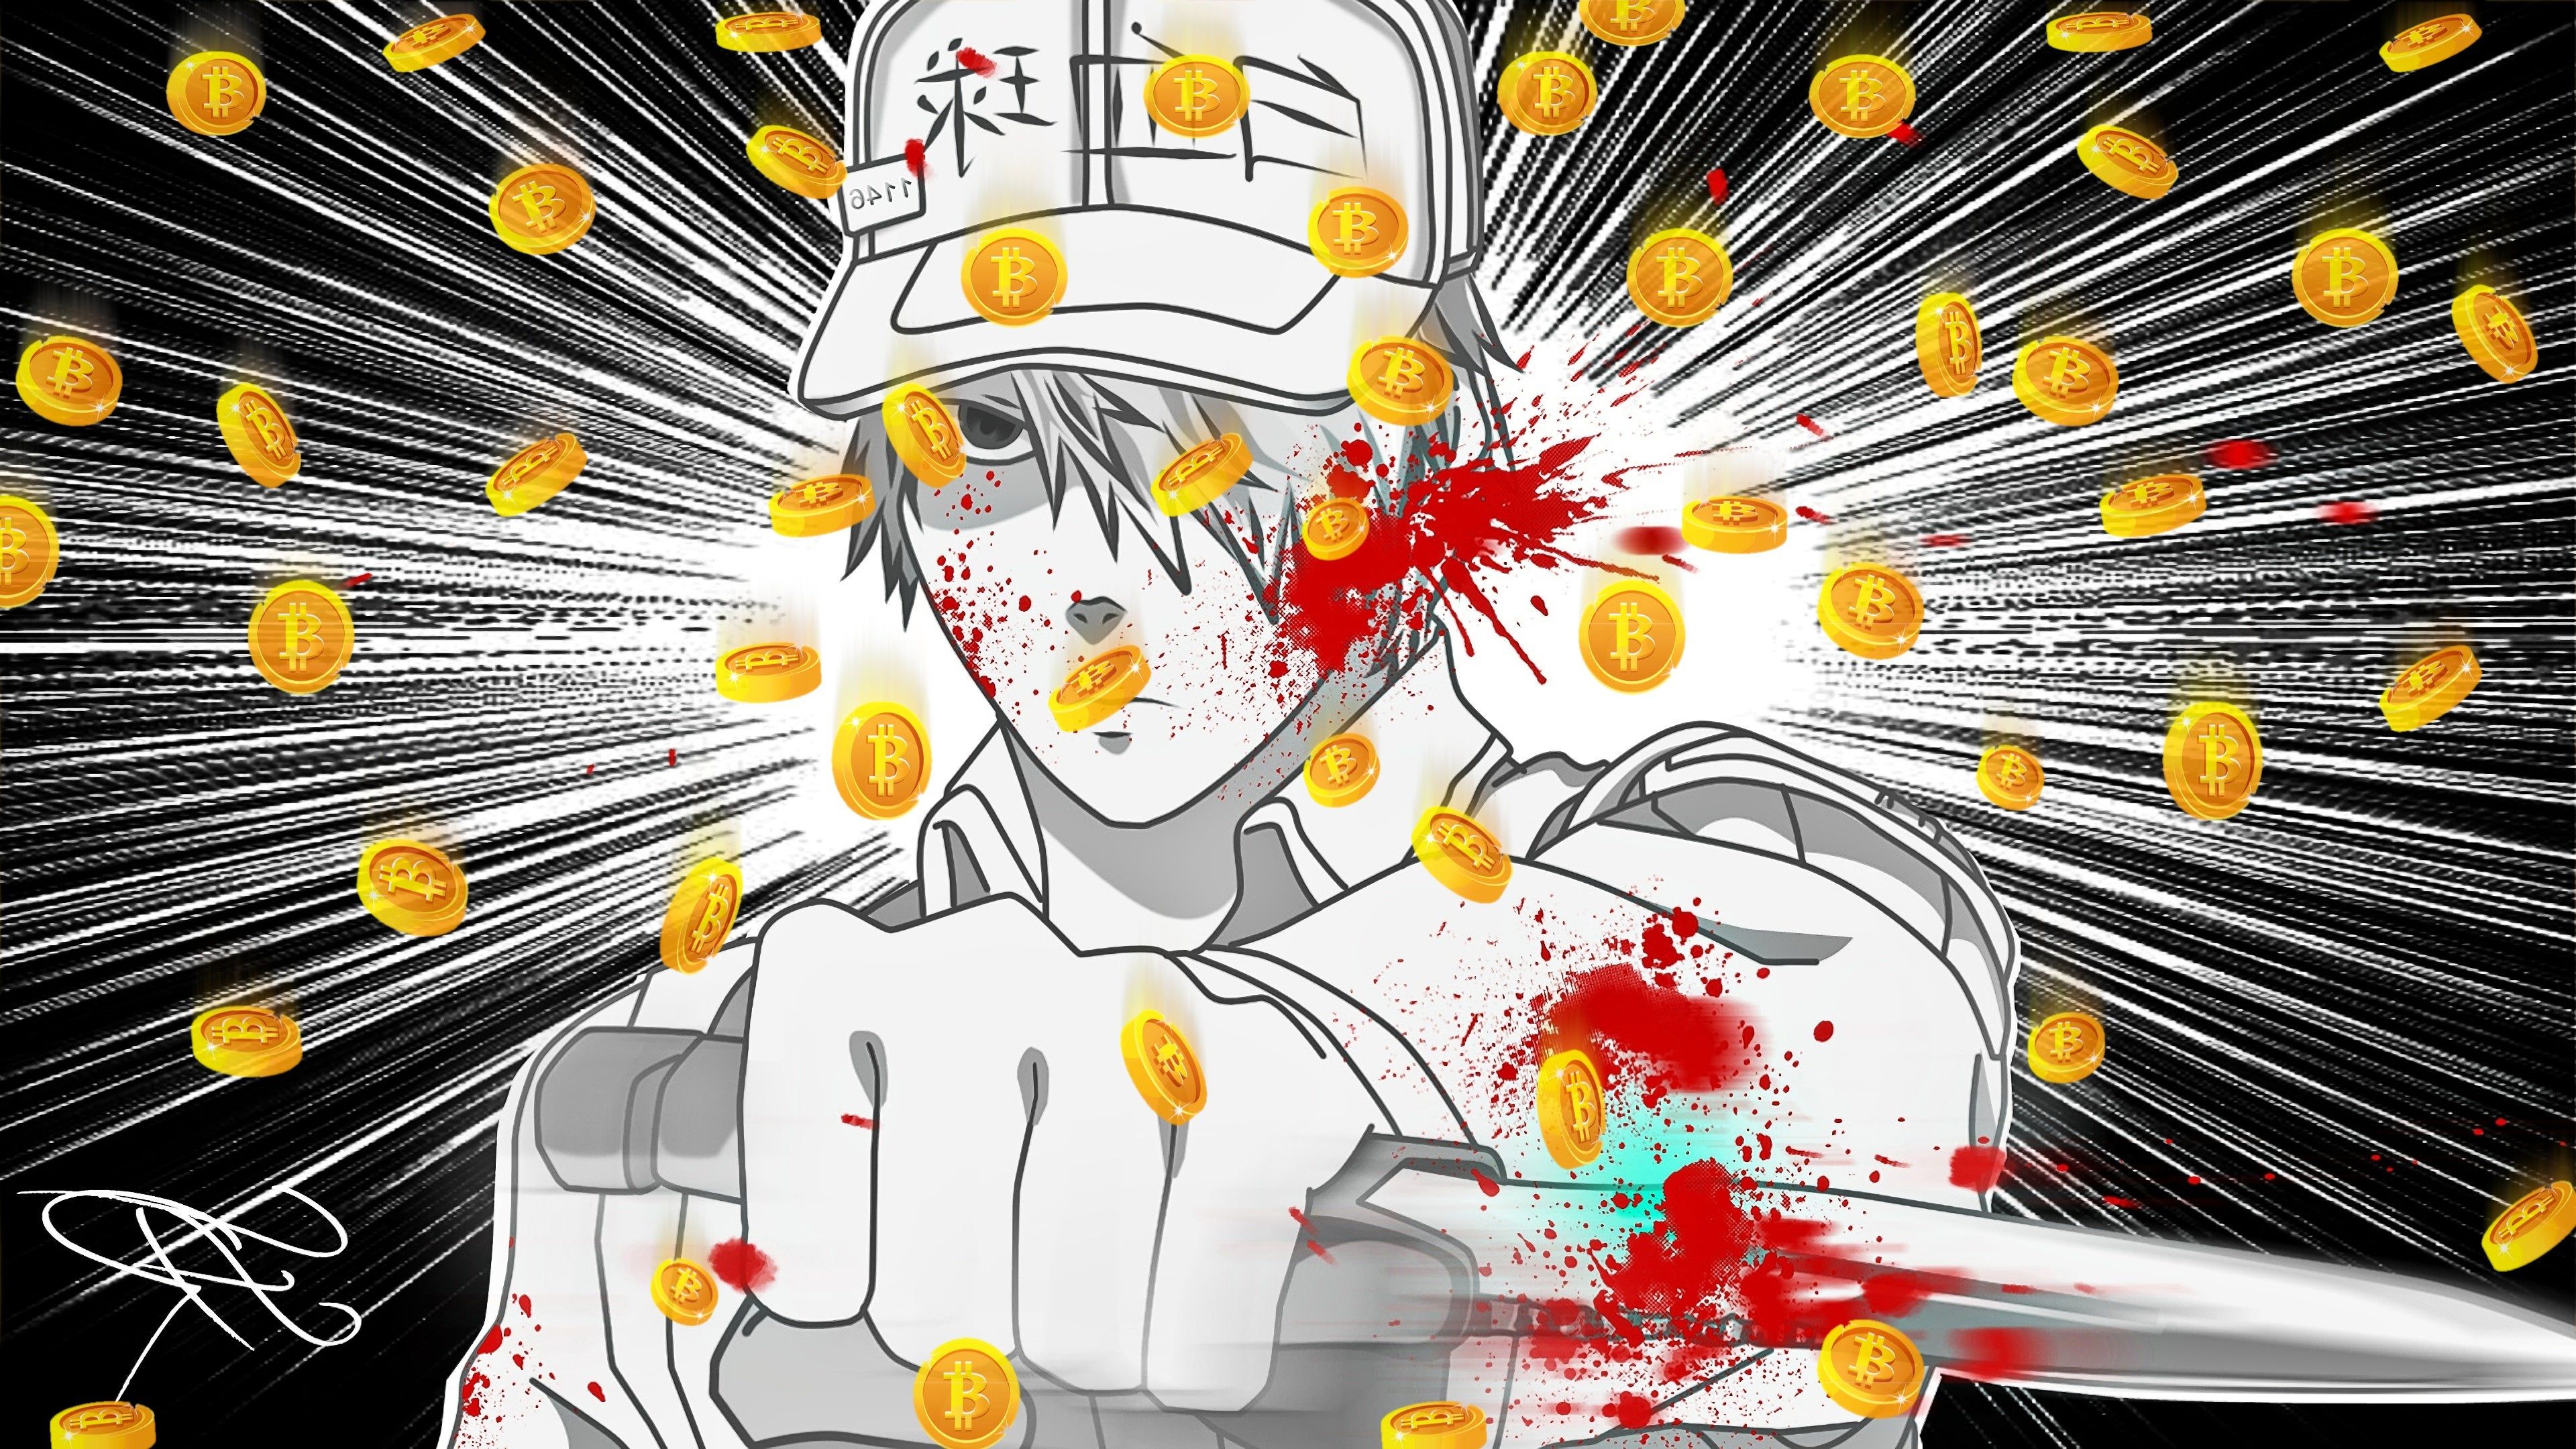 Bitcoins From Above White Blood Cell Cells At Work Hataraku Saibou S131 Wallpaper